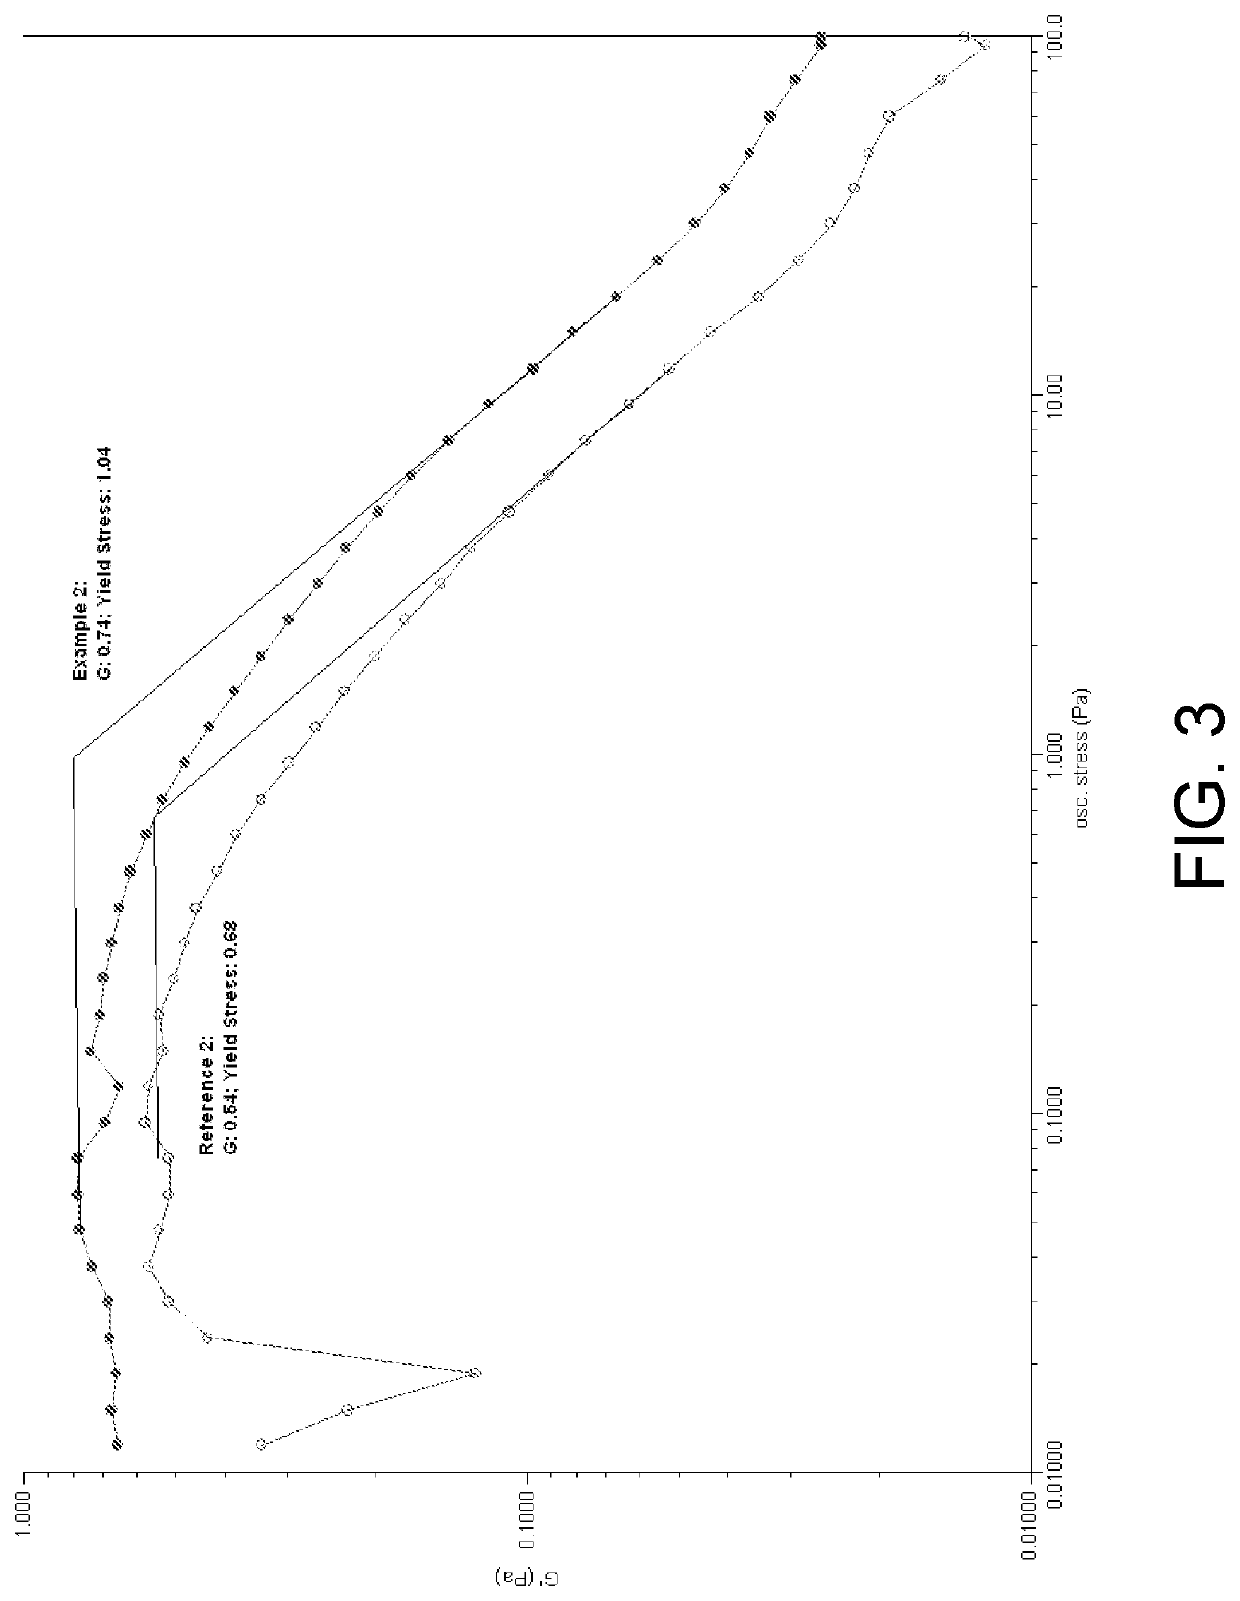 Structured Liquid Detergent Compositions That Include A Bacterial-Derived Cellulose Network